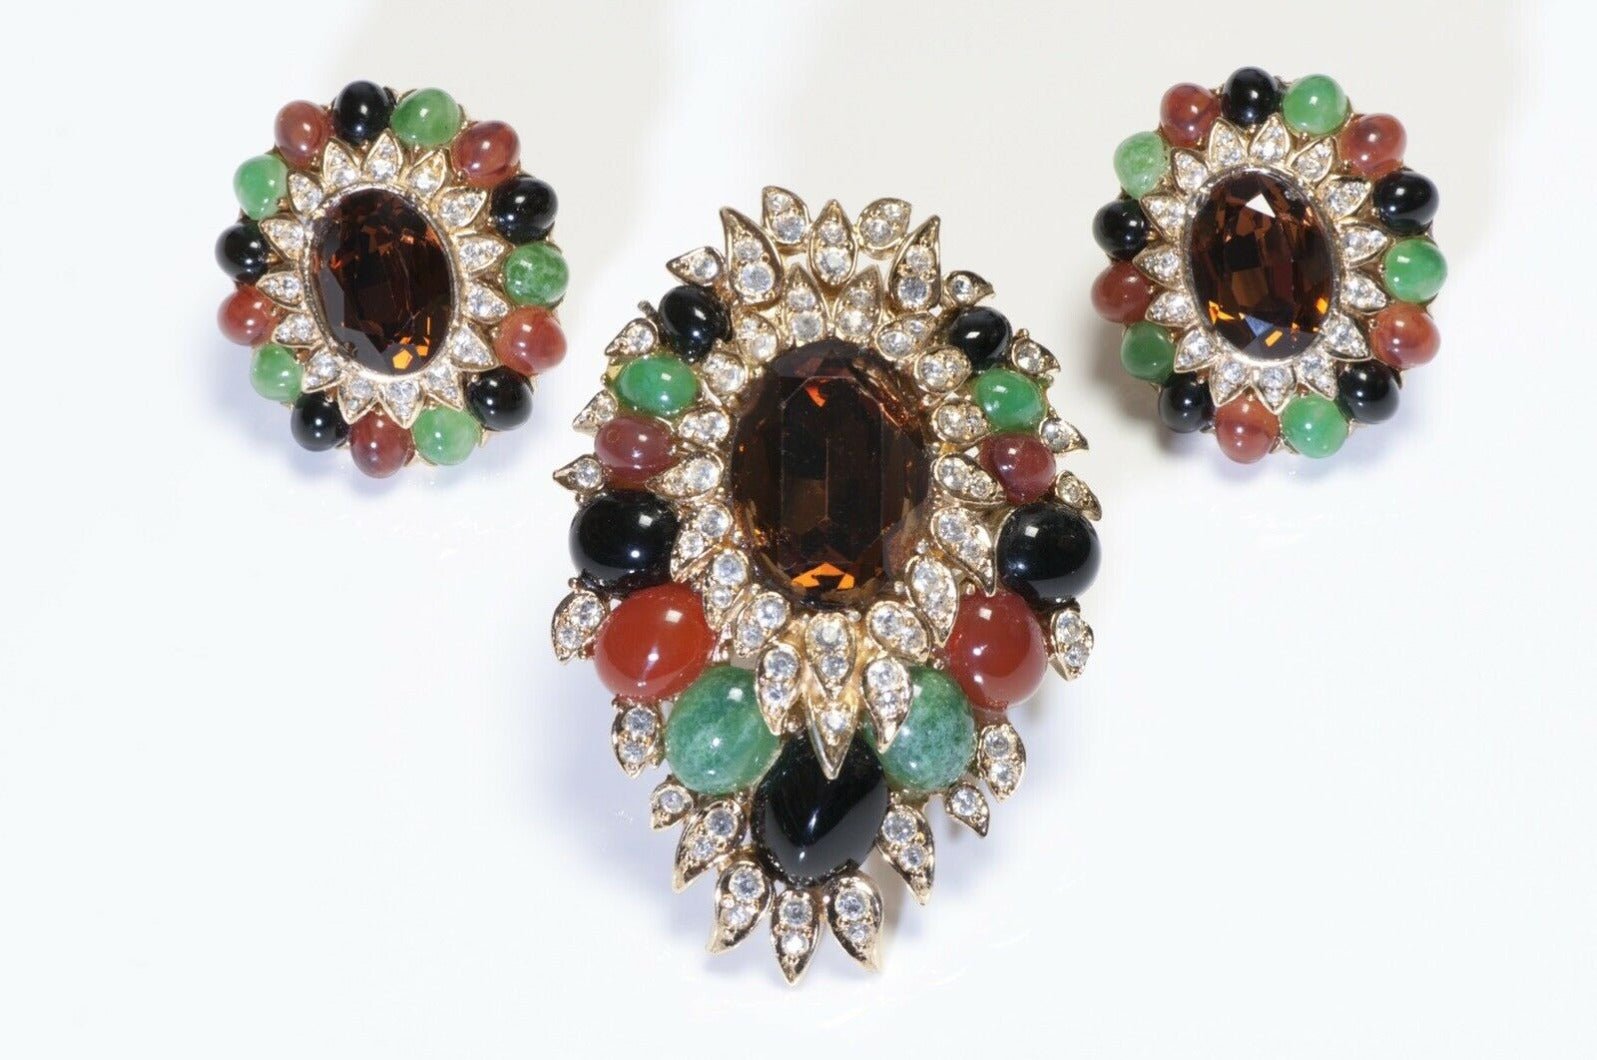 CINER Crystal Cabochon Glass Mughal Style Brooch Earrings Set - DSF Antique Jewelry